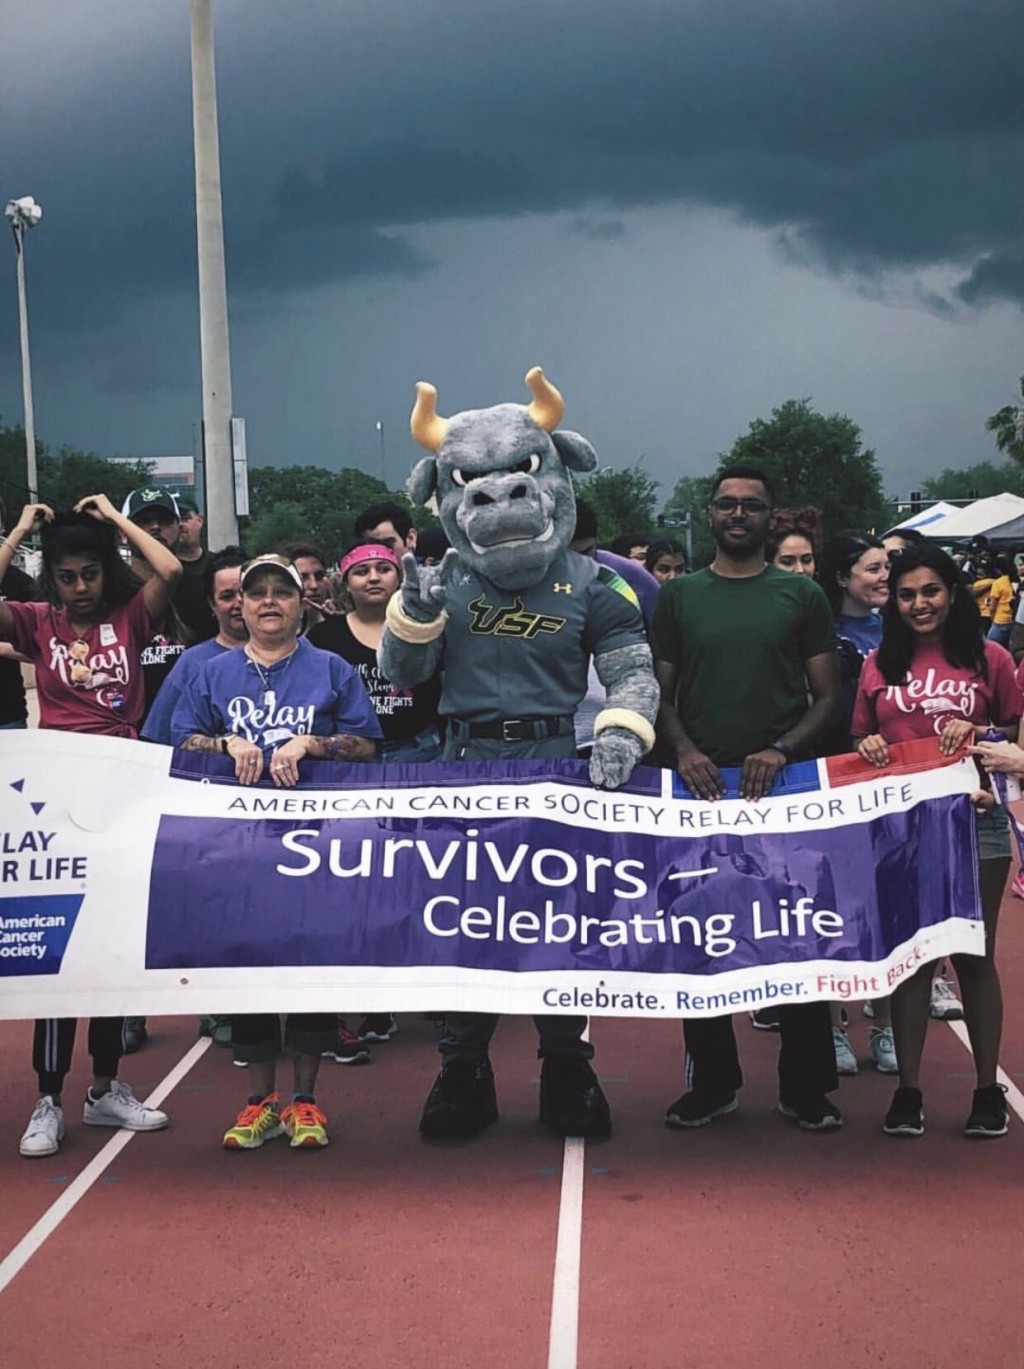 Major changes in place for this year’s Relay For Life